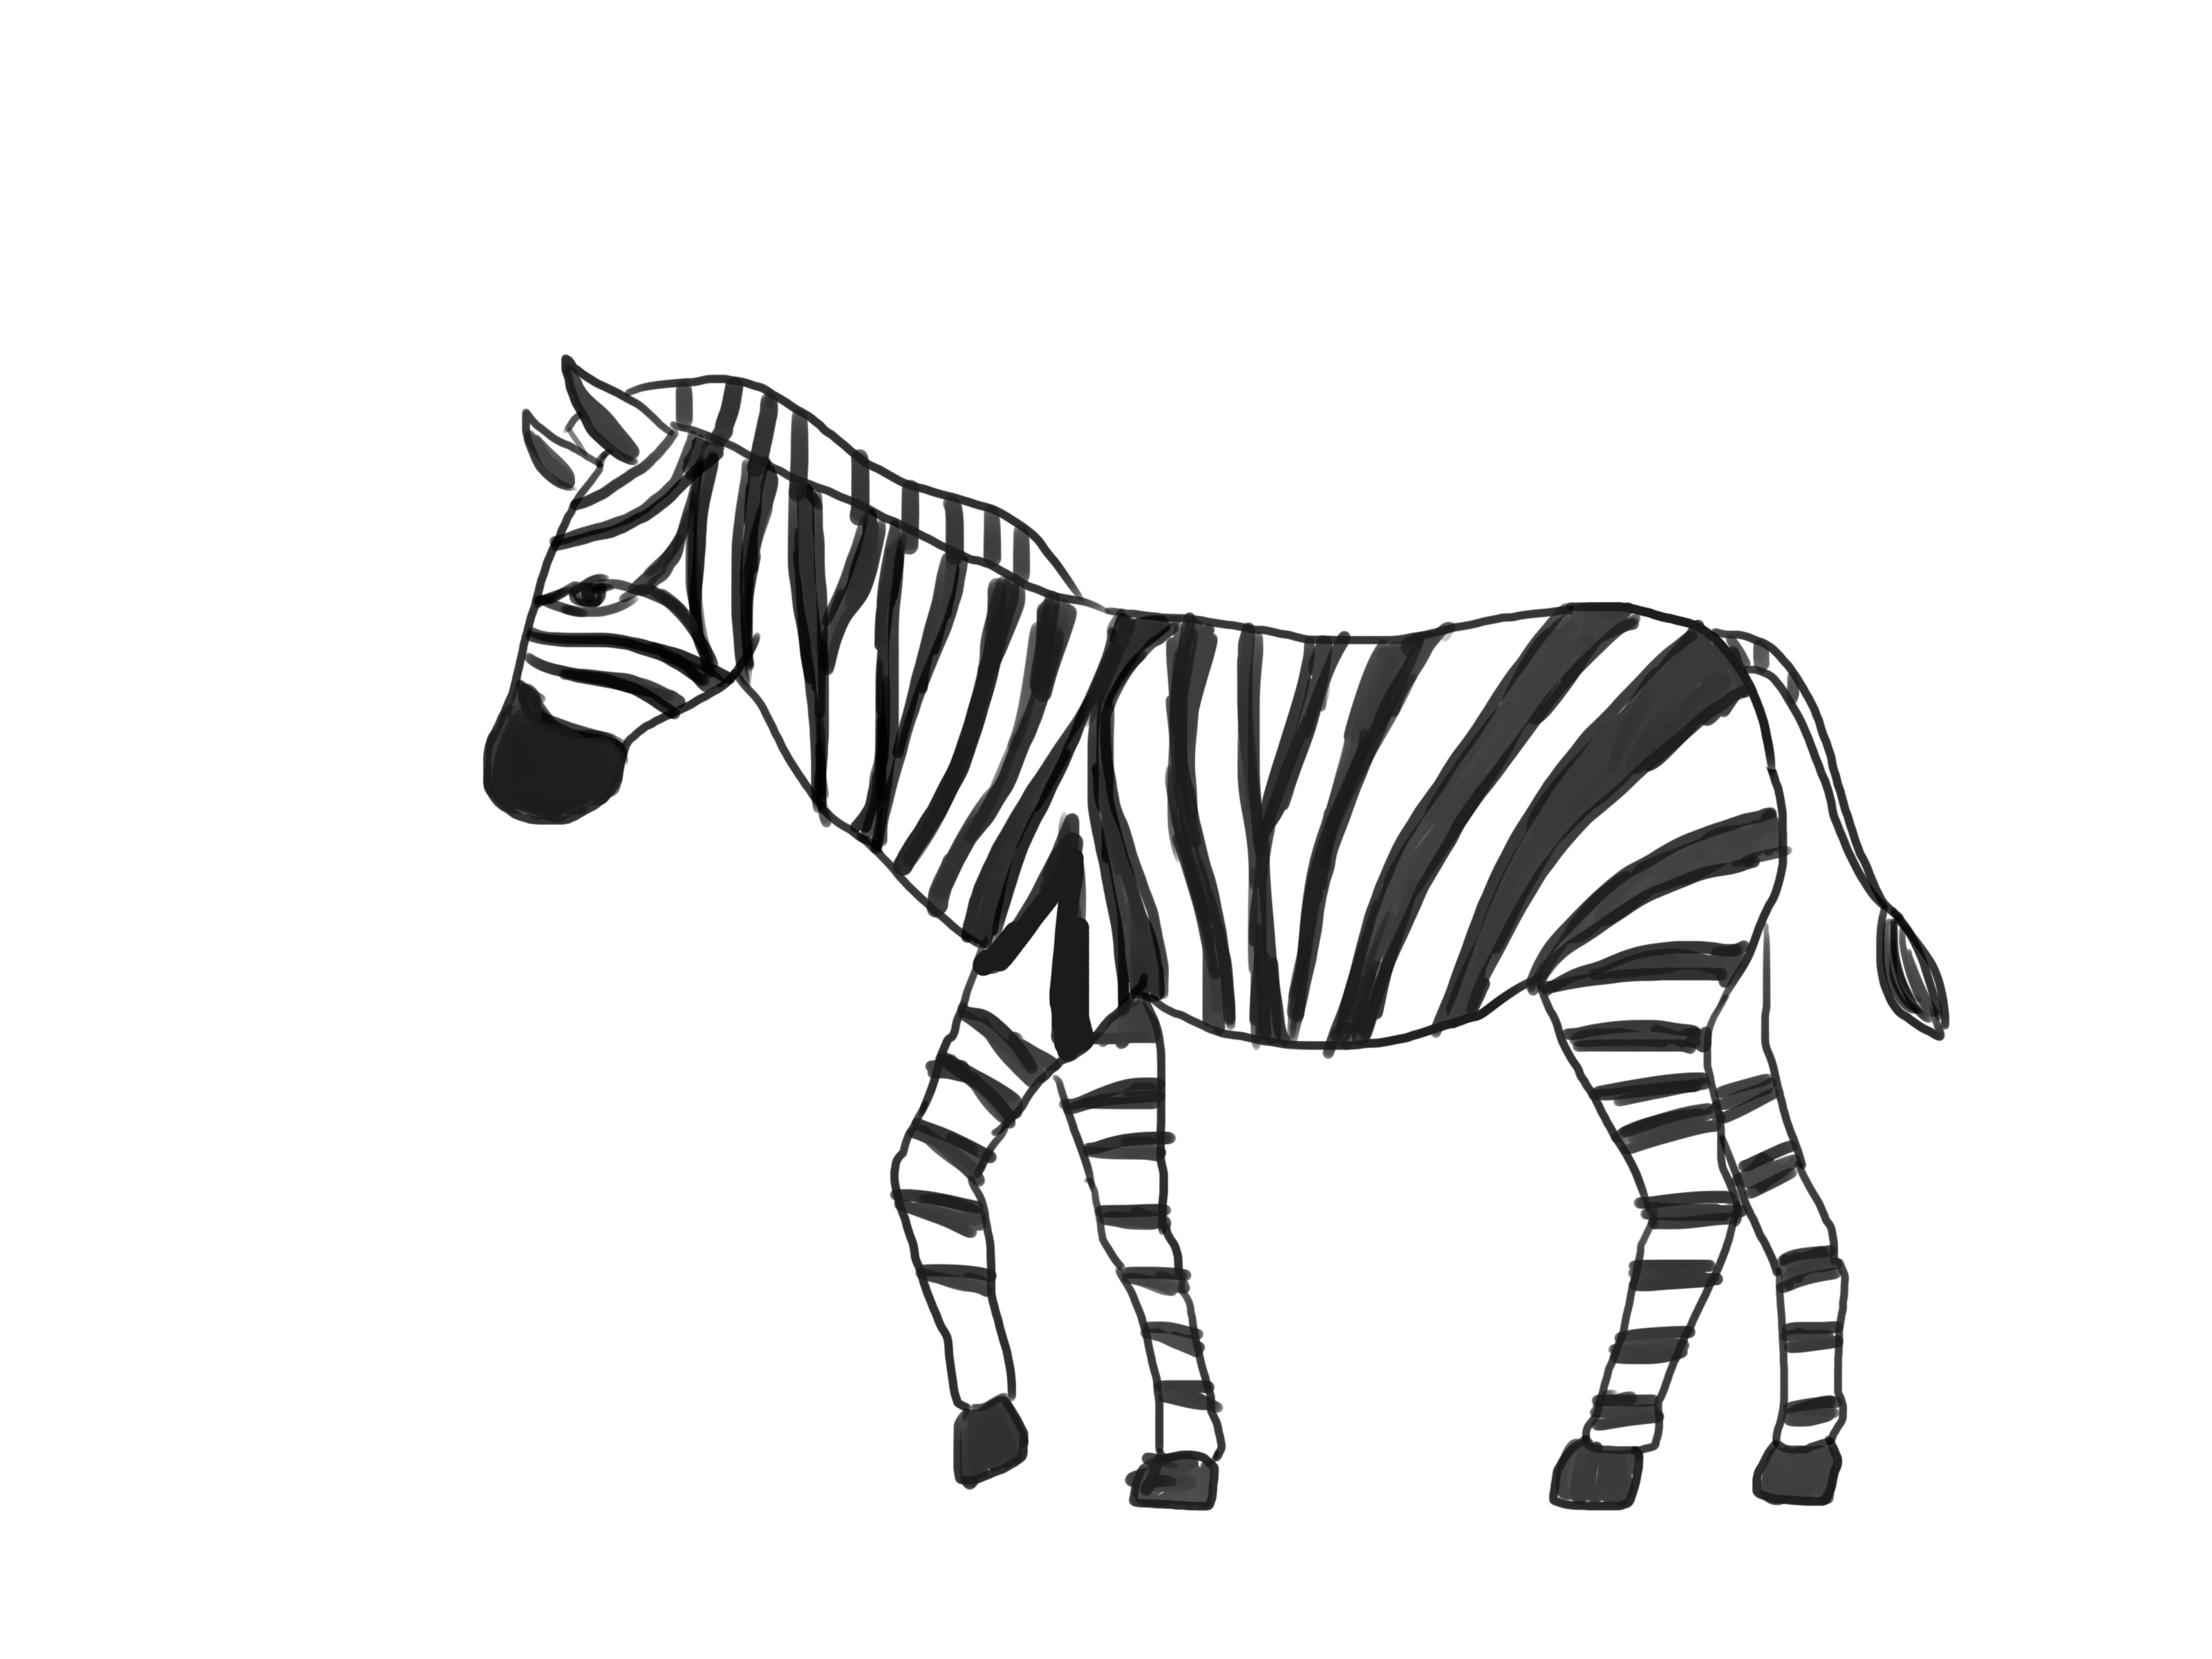 How to Draw a Zebra (with Pictures) - wikiHow